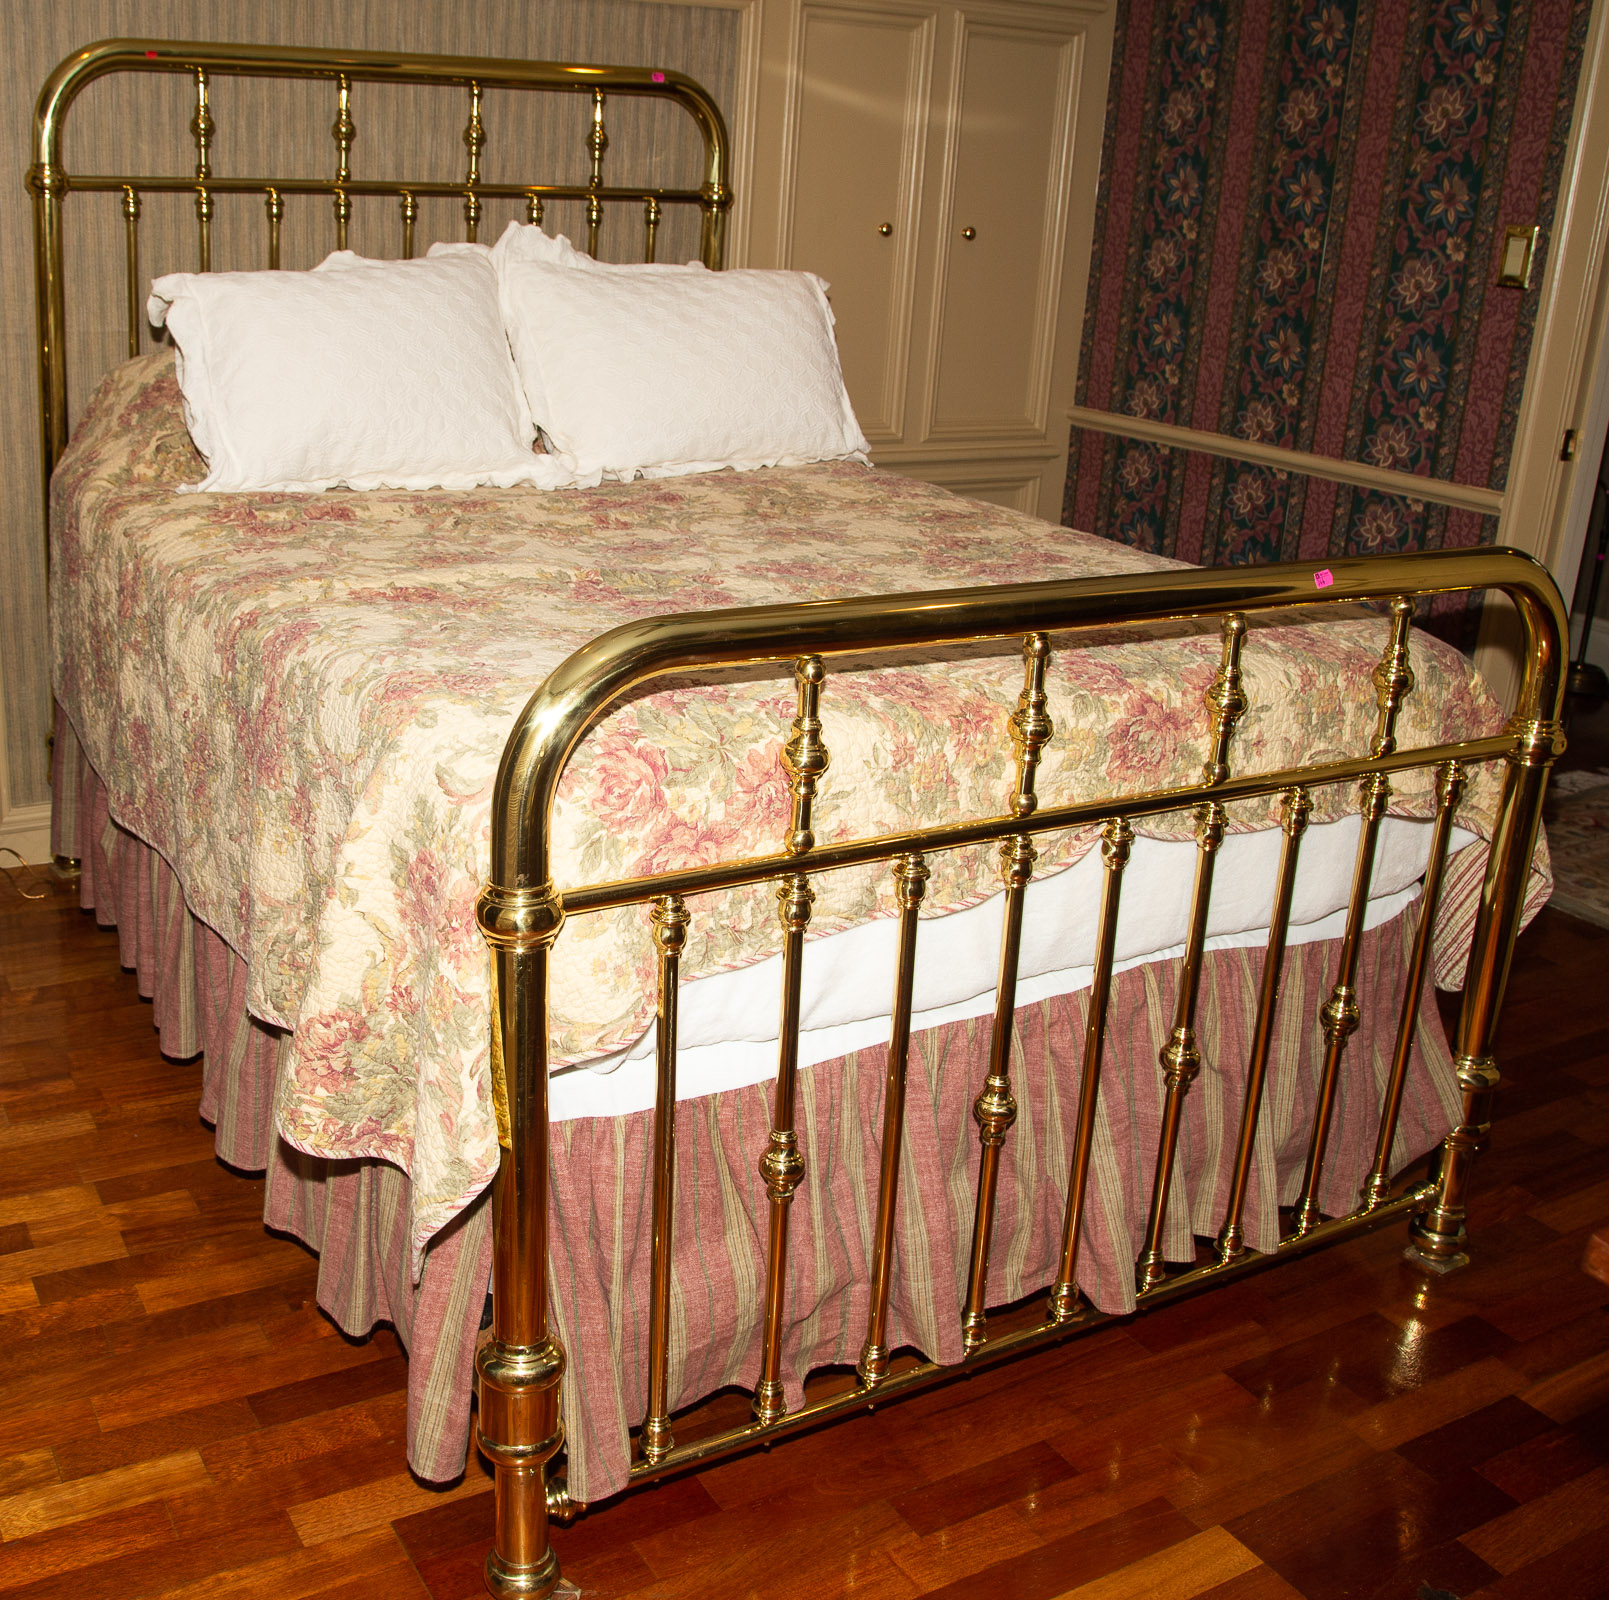 A BRASS BED & BUTLERS CHEST Full